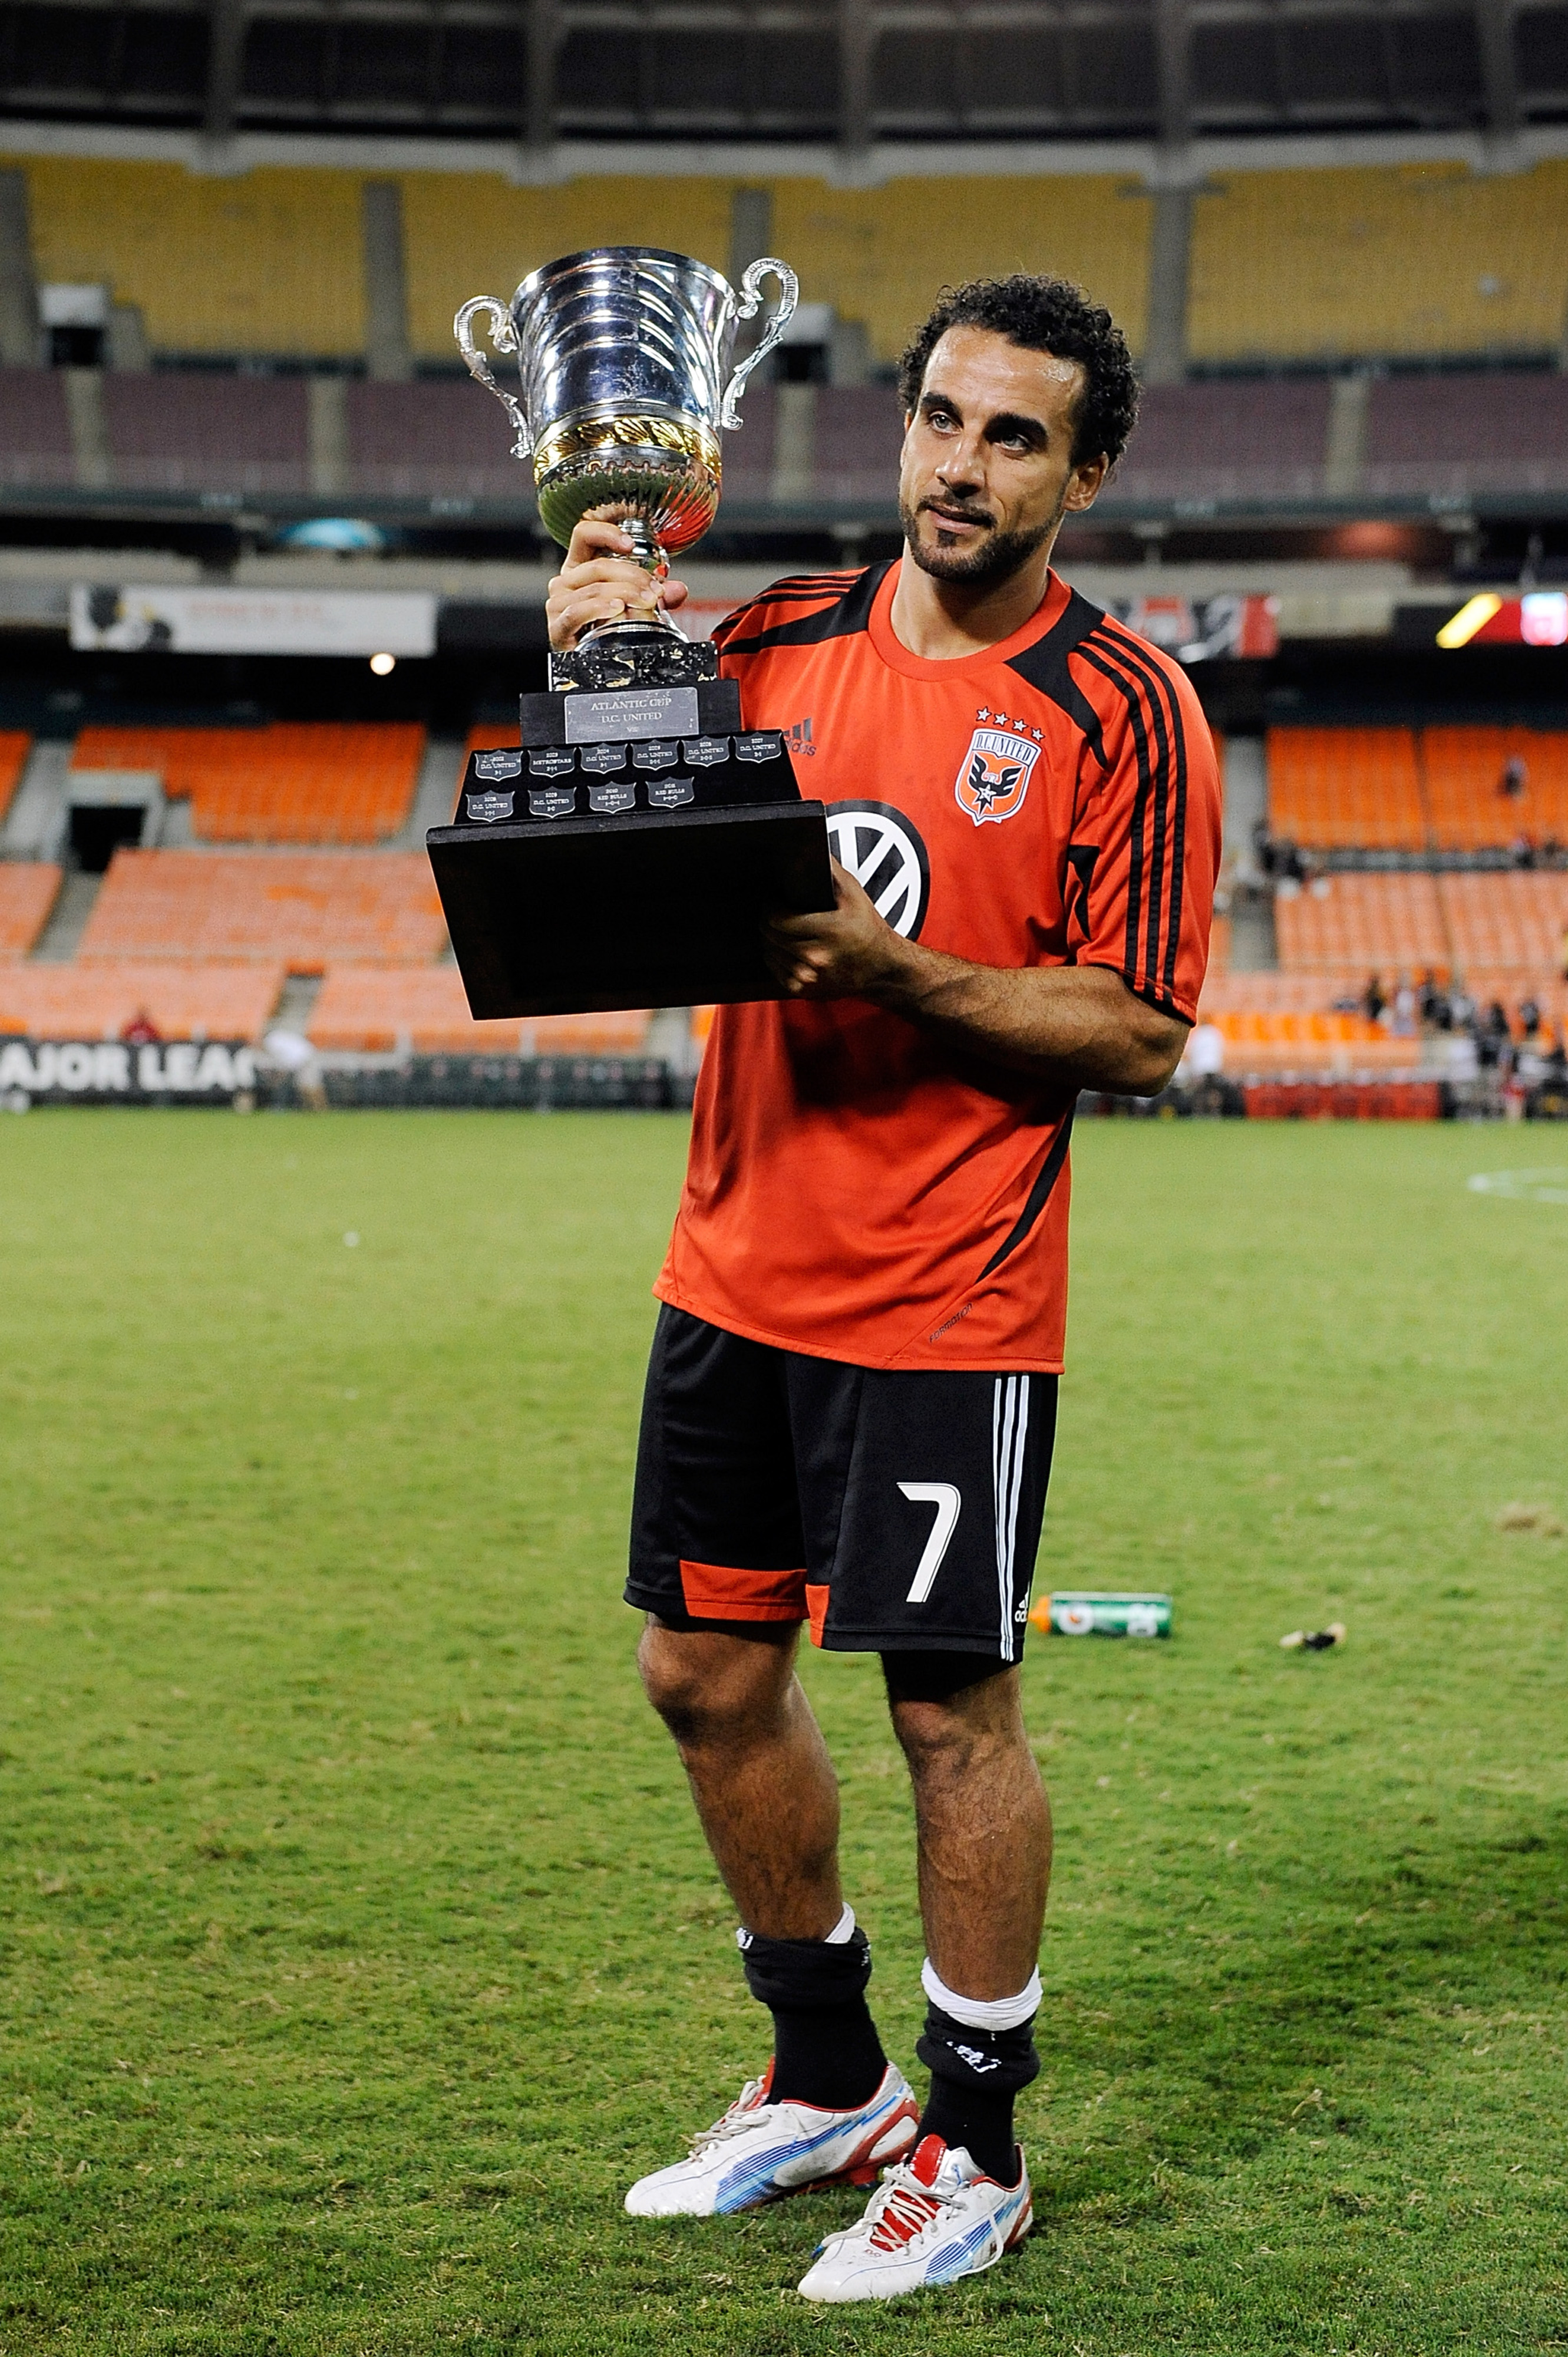 WASHINGTON, DC - AUGUST 29:  Dwayne De Rosario #7 of DC United celebrates with the Atlantic Cup after a game against the New York Red Bulls at RFK Stadium on August 29, 2012 in Washington, DC.  (Photo by Patrick McDermott/Getty Images)